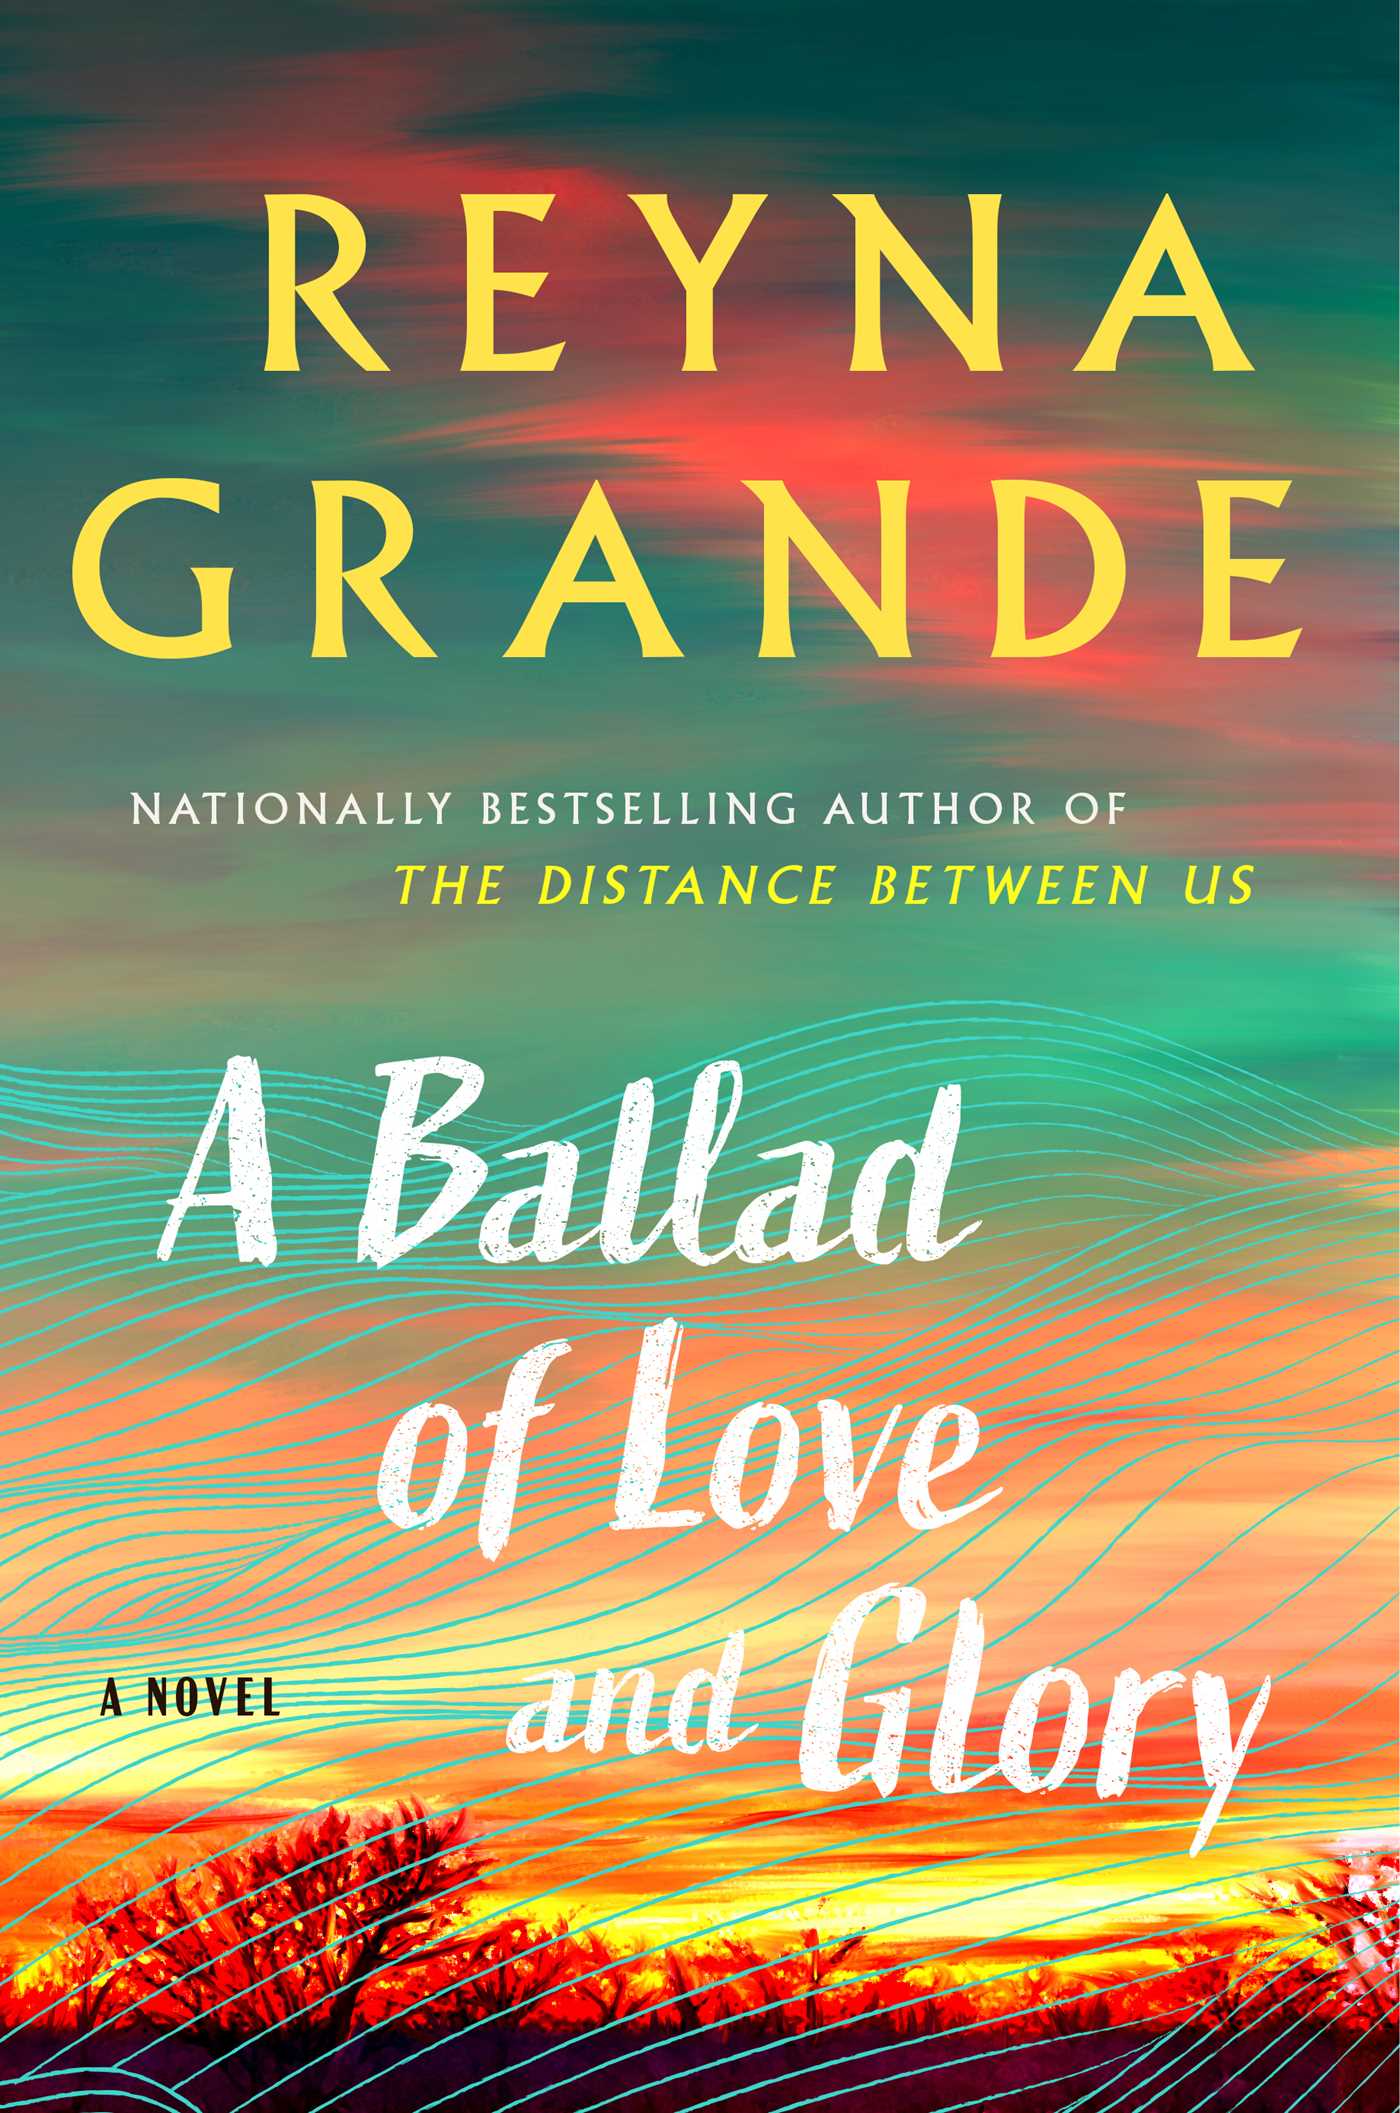 A Ballad of Love and Glory Book Cover